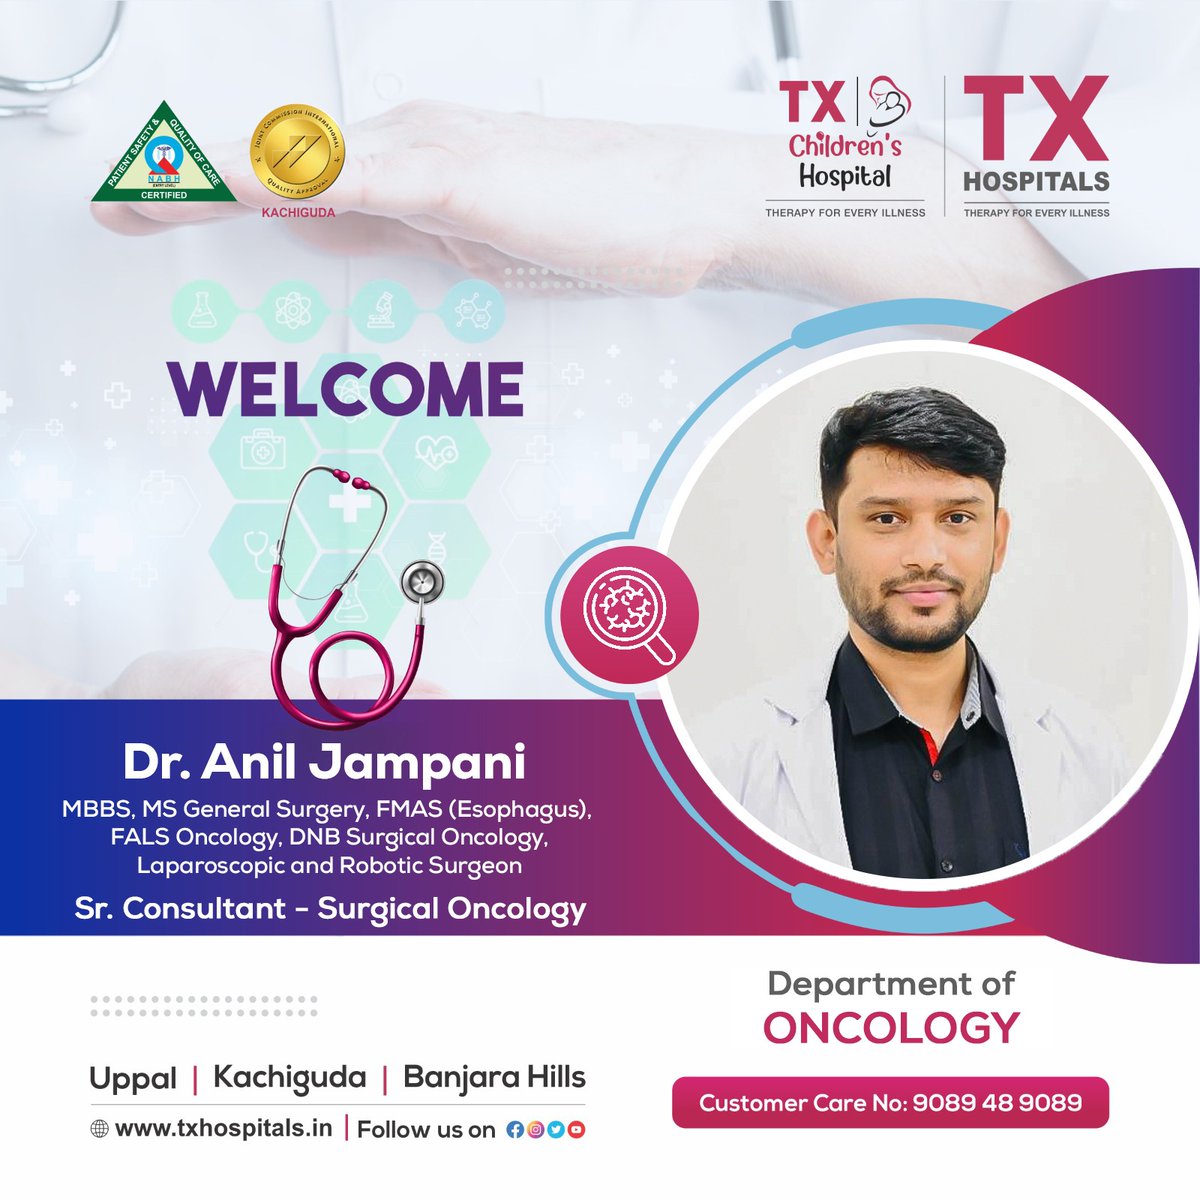 TX Hospitals Heartly Welcomes You, Sir! Dr. Anil Jampani MBBS, MS General Surgery, FMAS (Esophagus), FALS Oncology, DNB Surgical Oncology, Laparoscopic and Robotic Surgeon Sr. Consultant - Surgical Oncology Book Now: txhospitals.in Call Now: 9089489089 #surgicaloncology